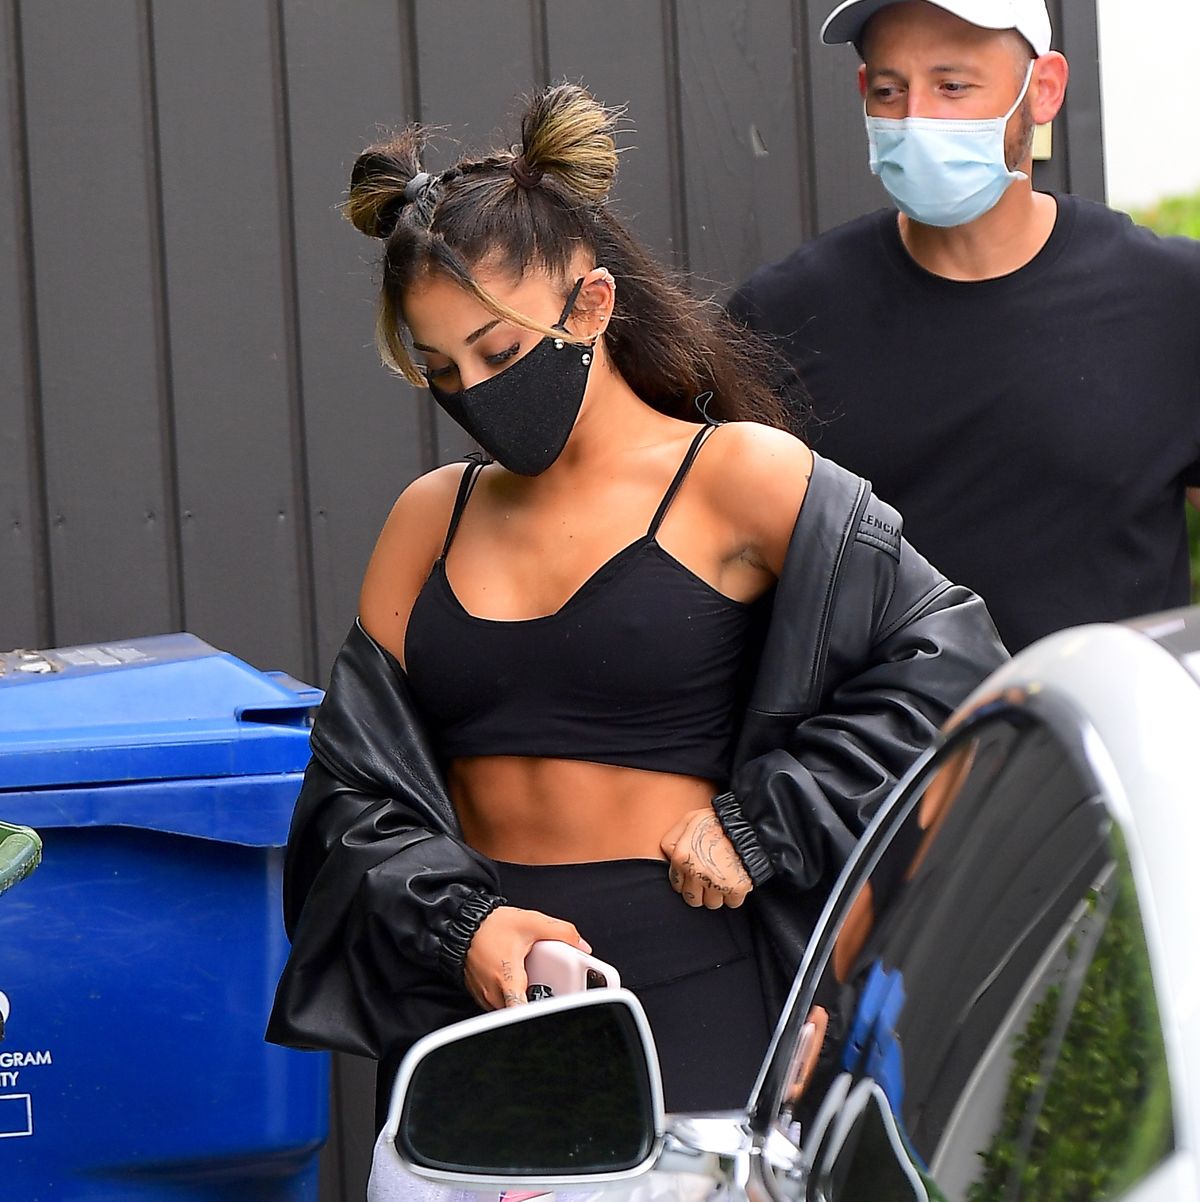 Gallers Ariana Grande Porn Captions - Ariana Grande Shows Off Abs While Leaving L.A. Gym